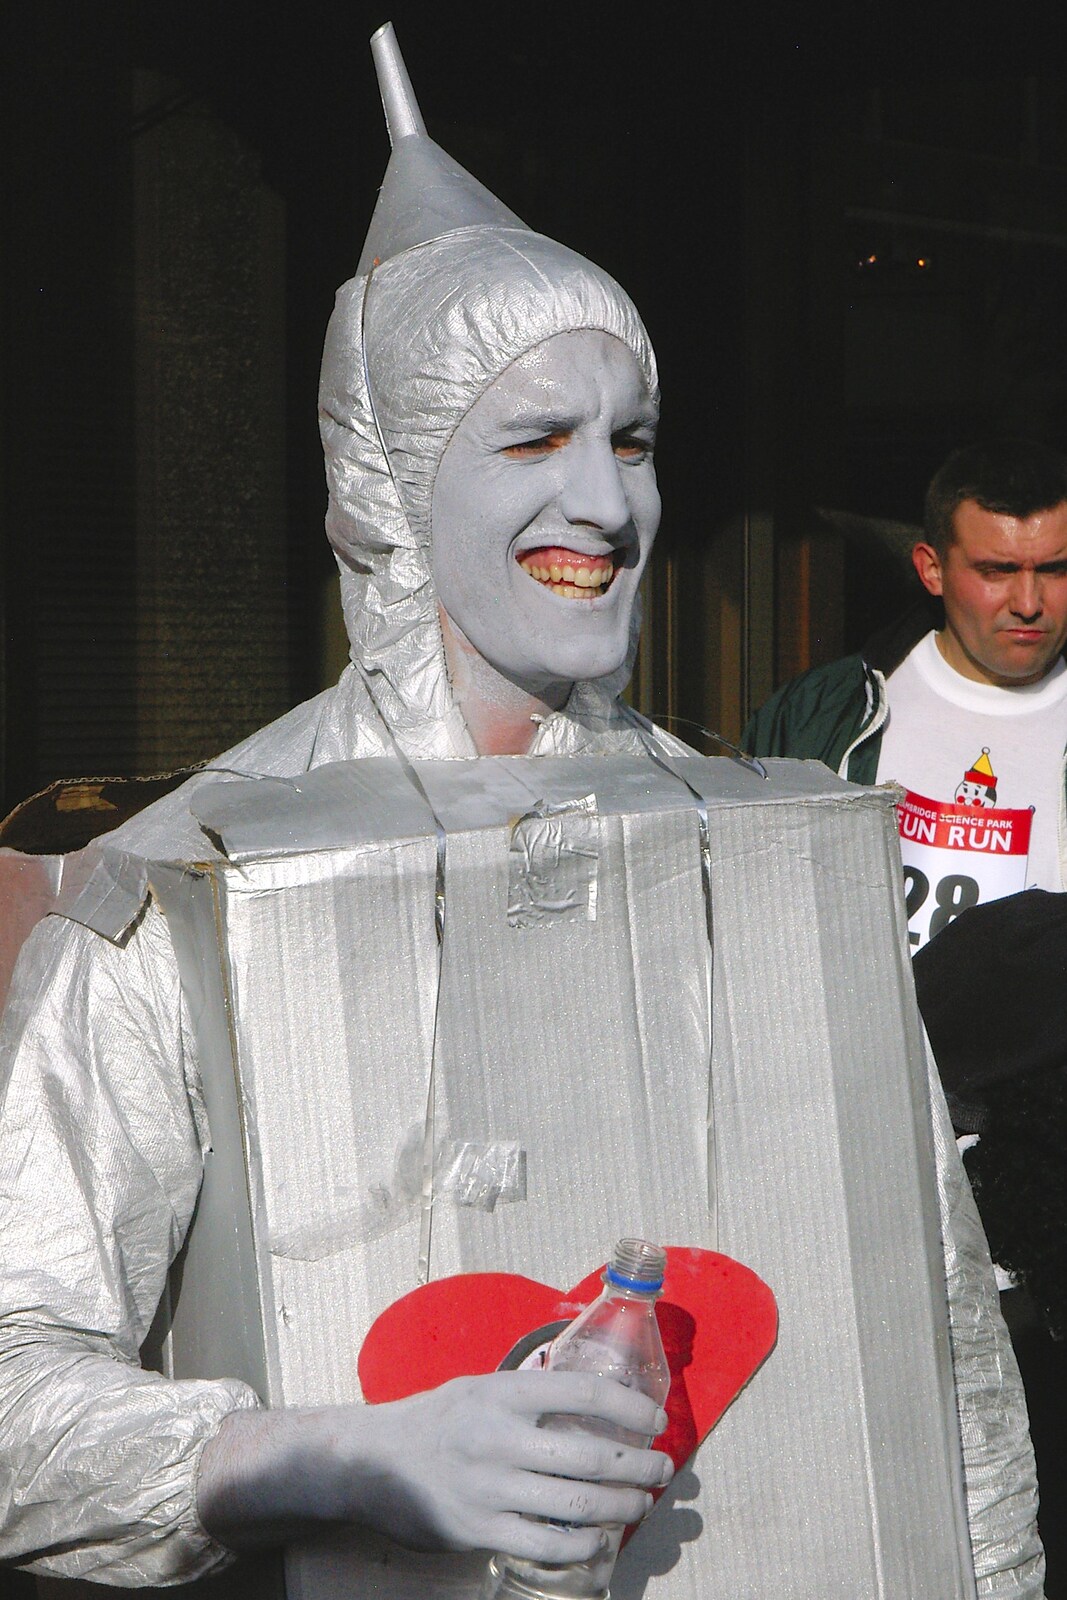 The Tin Man out of the Wizard of Oz from Cambridge Science Park "Children in Need" Fun Run, Milton Road, Cambridge - 17th November 2006